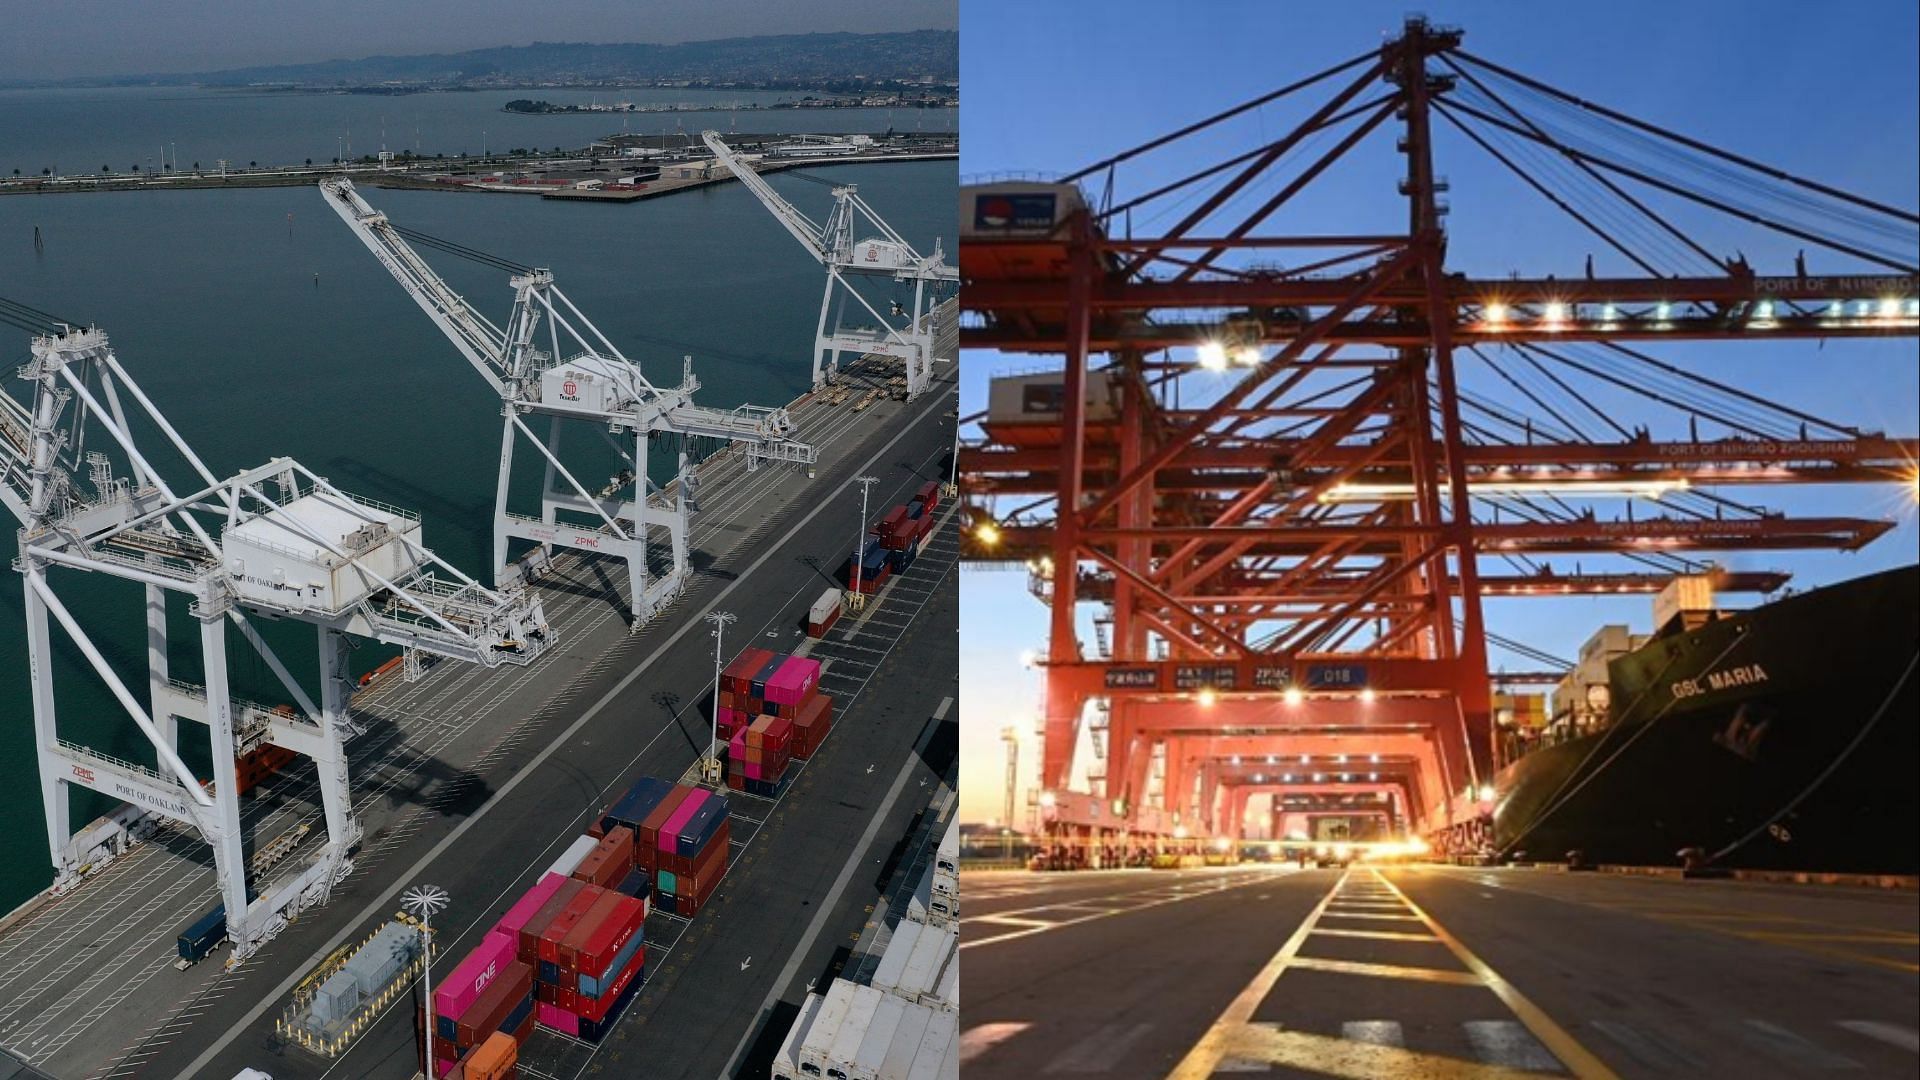 U.S. officials make new claims about Chinese cranes at U.S. ports containing spying tools. (Image via Getty Images)